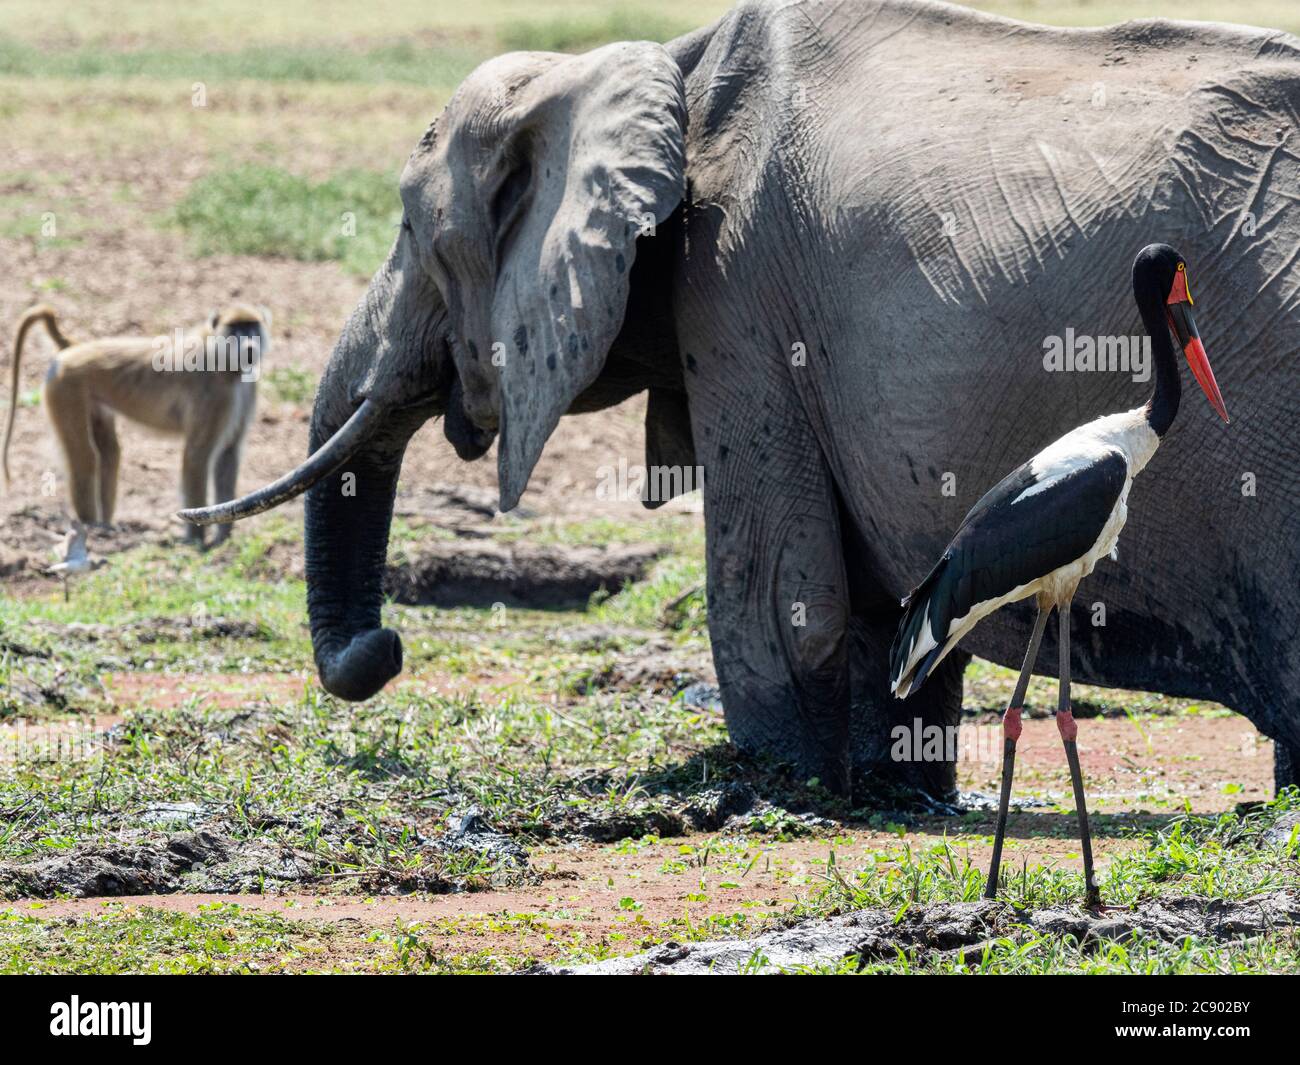 Saddle-billed stork, Ephippiorhynchus senegalensis, in the foreground with an elephant and monkey in the background, South Luangwa National Park Stock Photo